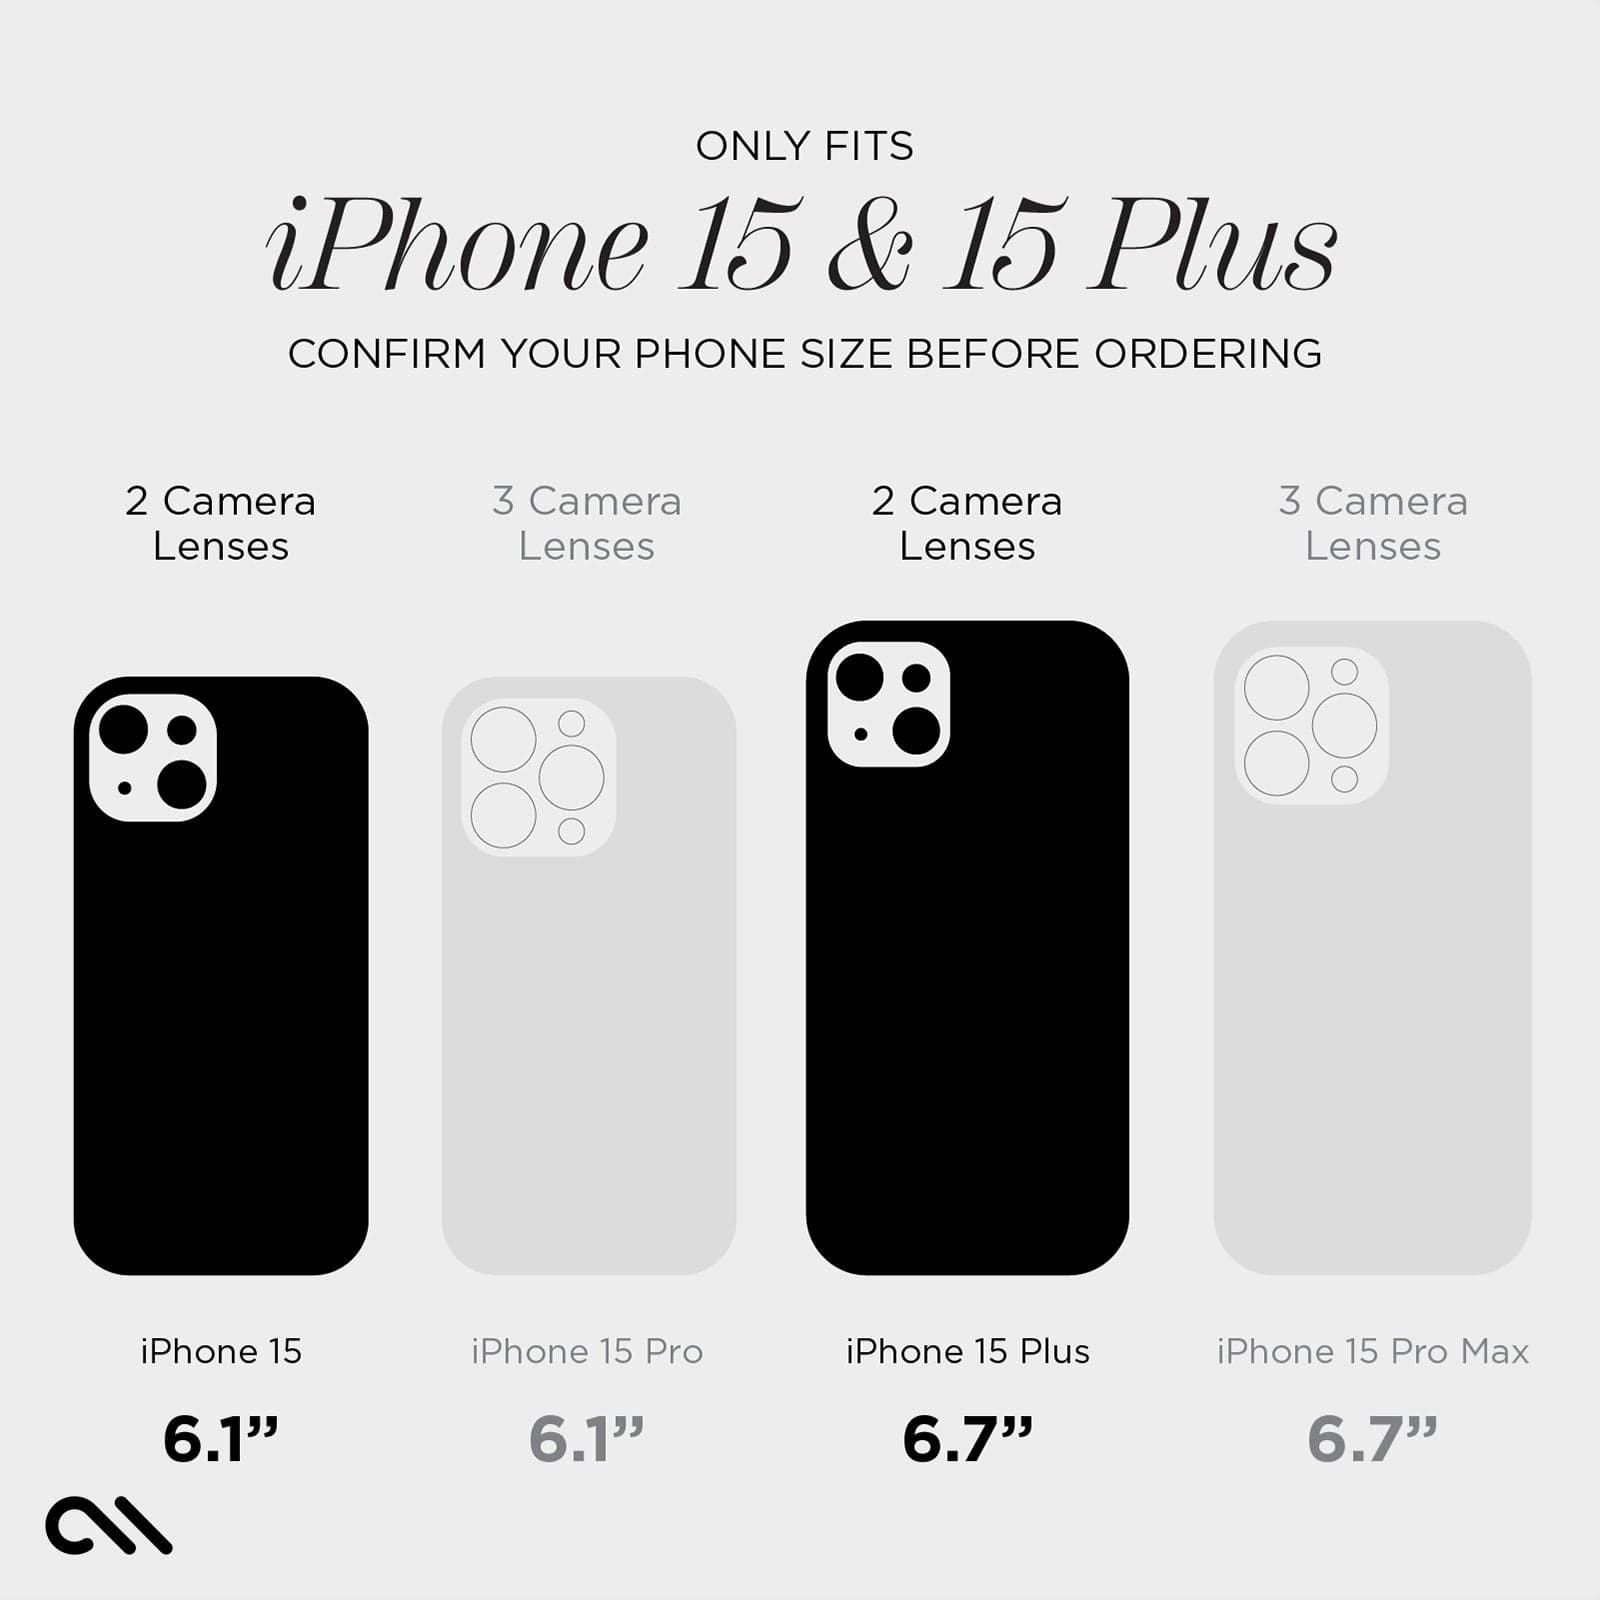 ONLY FITS IPHONE 15 AND 15 PLUS. CONFIRM YOUR PHONE SIZE BEFORE ORDERING